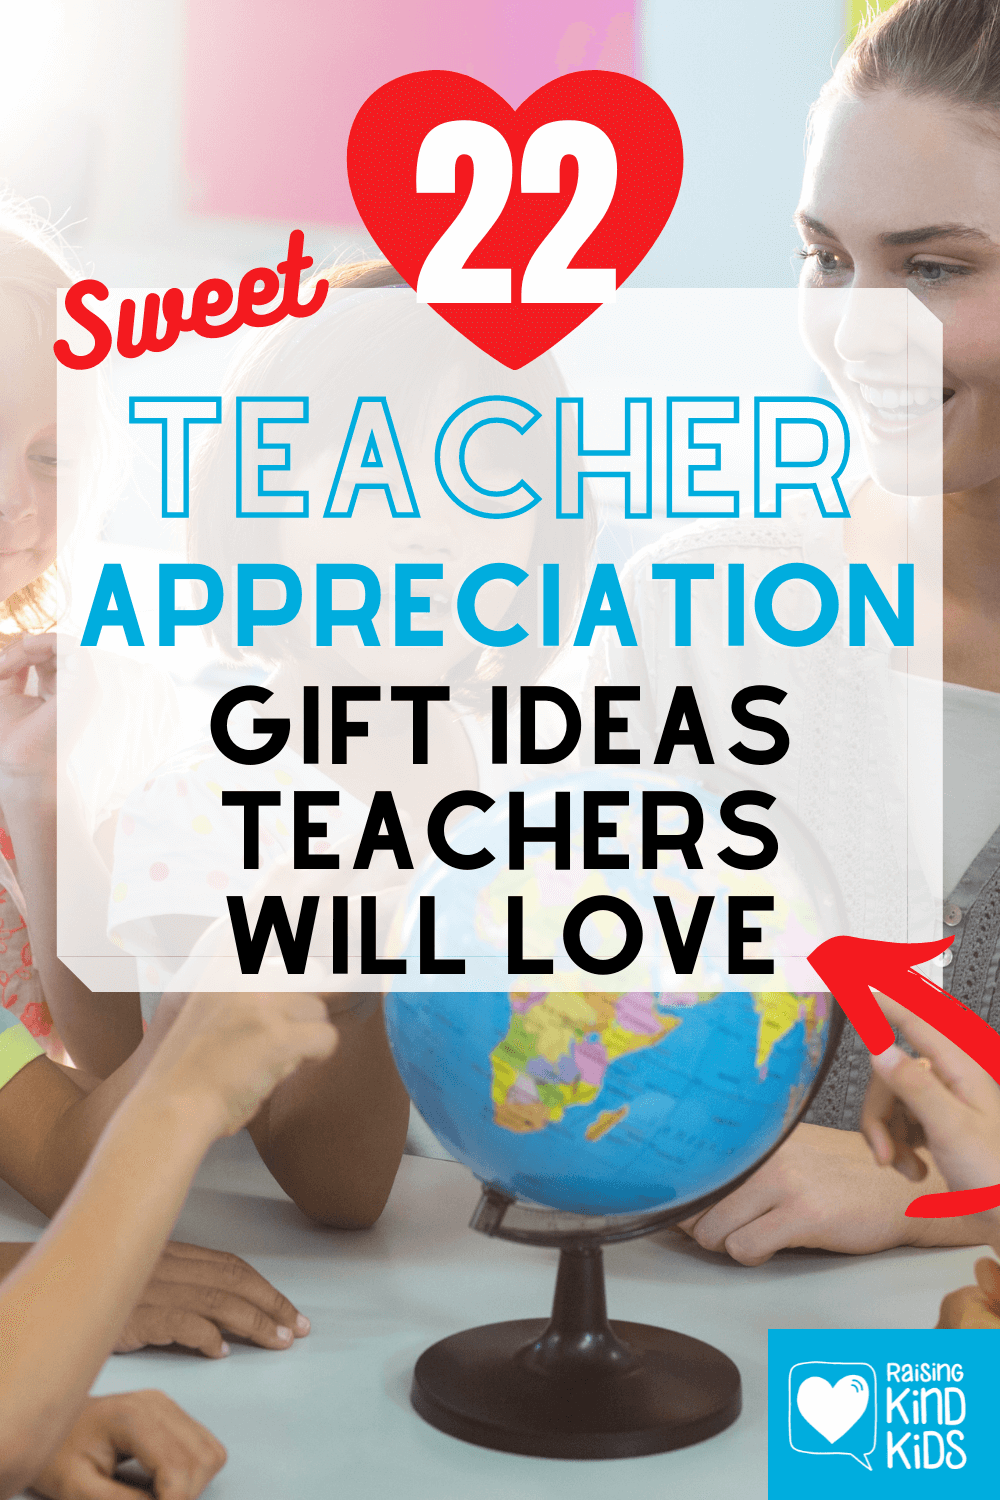 For teacher appreciation gift ideas, try one of these 22 sweet and thoughtful gift ideas to let your child's teacher know how much you value them. #teacherappreciation #thankateacher #teachergiftideas #giftguides #giftideas #teachergifts #coffeeandcarpool #freeprintable